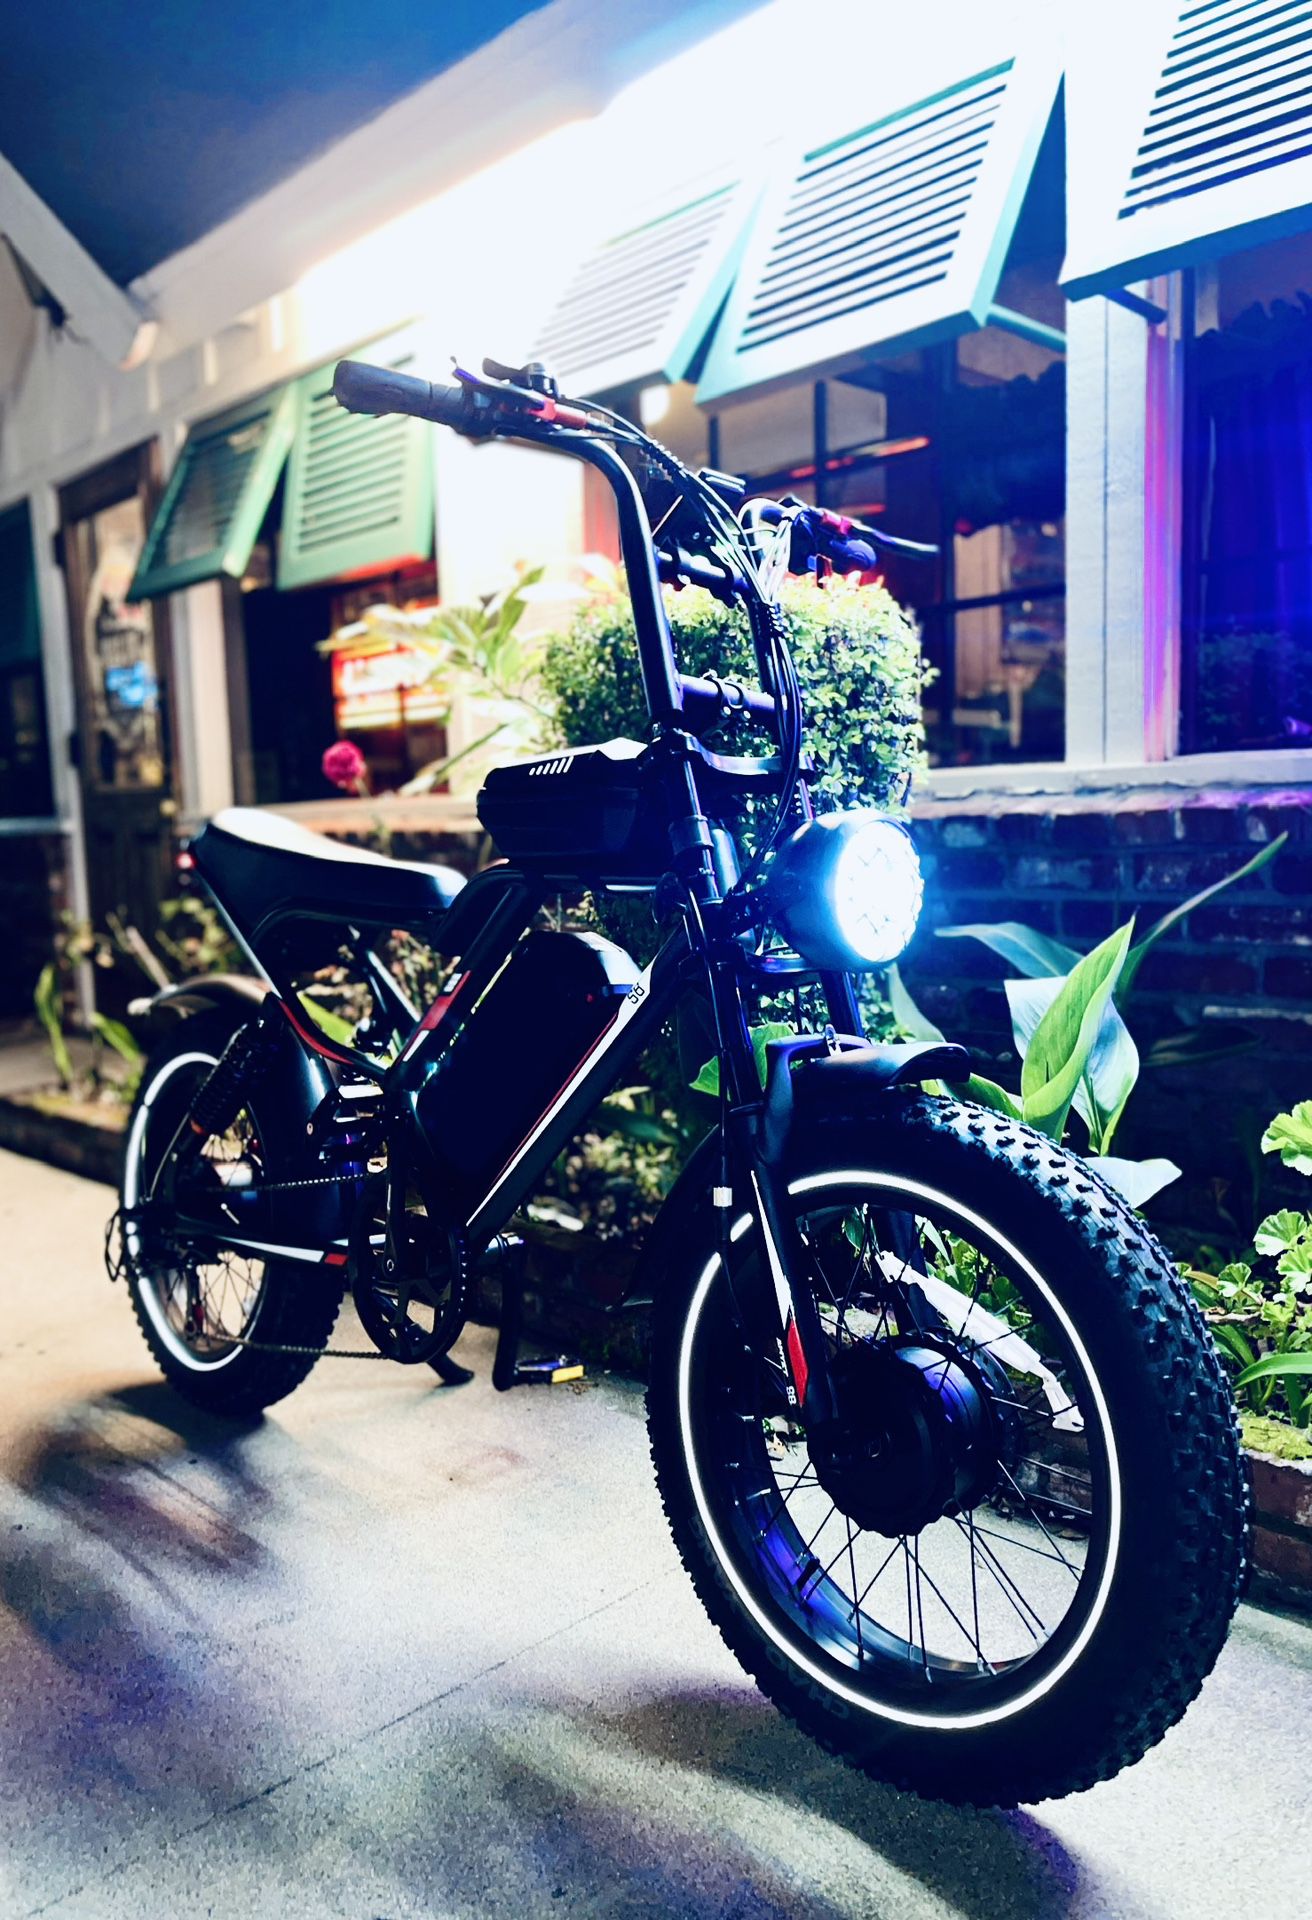 🎊💸$50 Down No Credit Finance This⚡️🚴‍♂️🚚Super Electric Ebike 35 Mph Dual Powerful Motors 🏍️Brand New